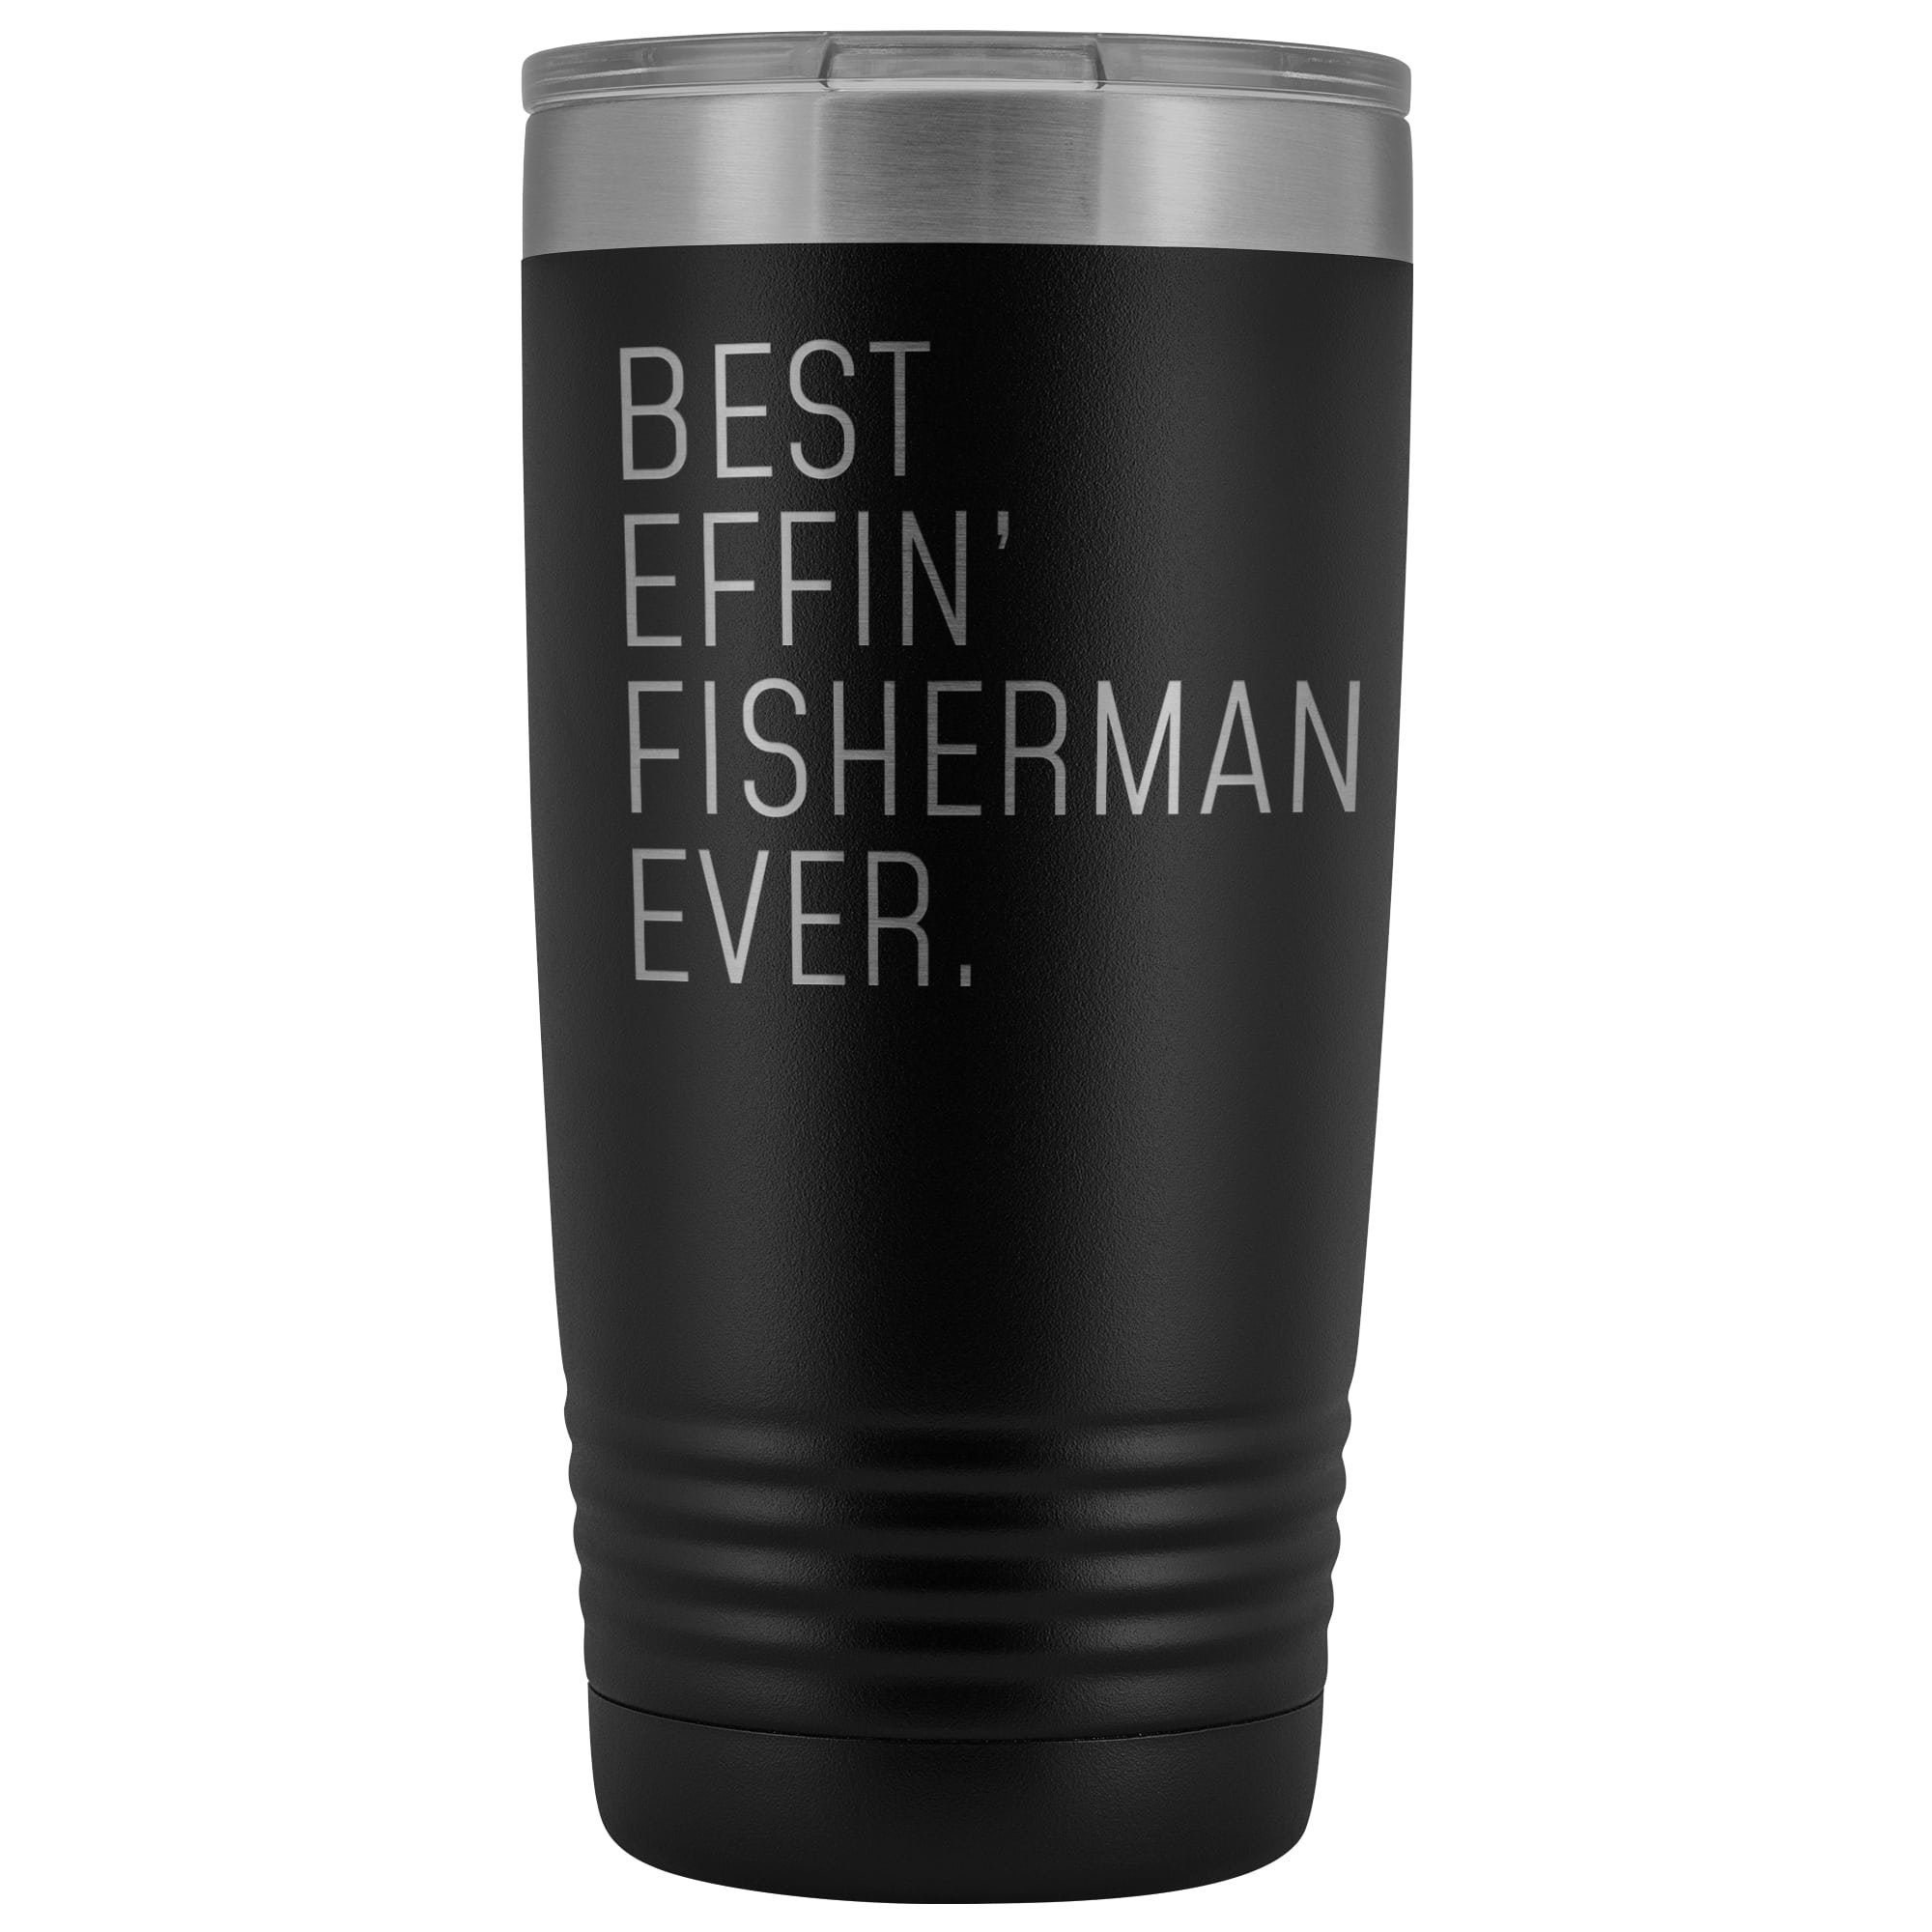 Fishing Gifts for Men, Gifts for Dad, Gifts for Boyfriend, Gift